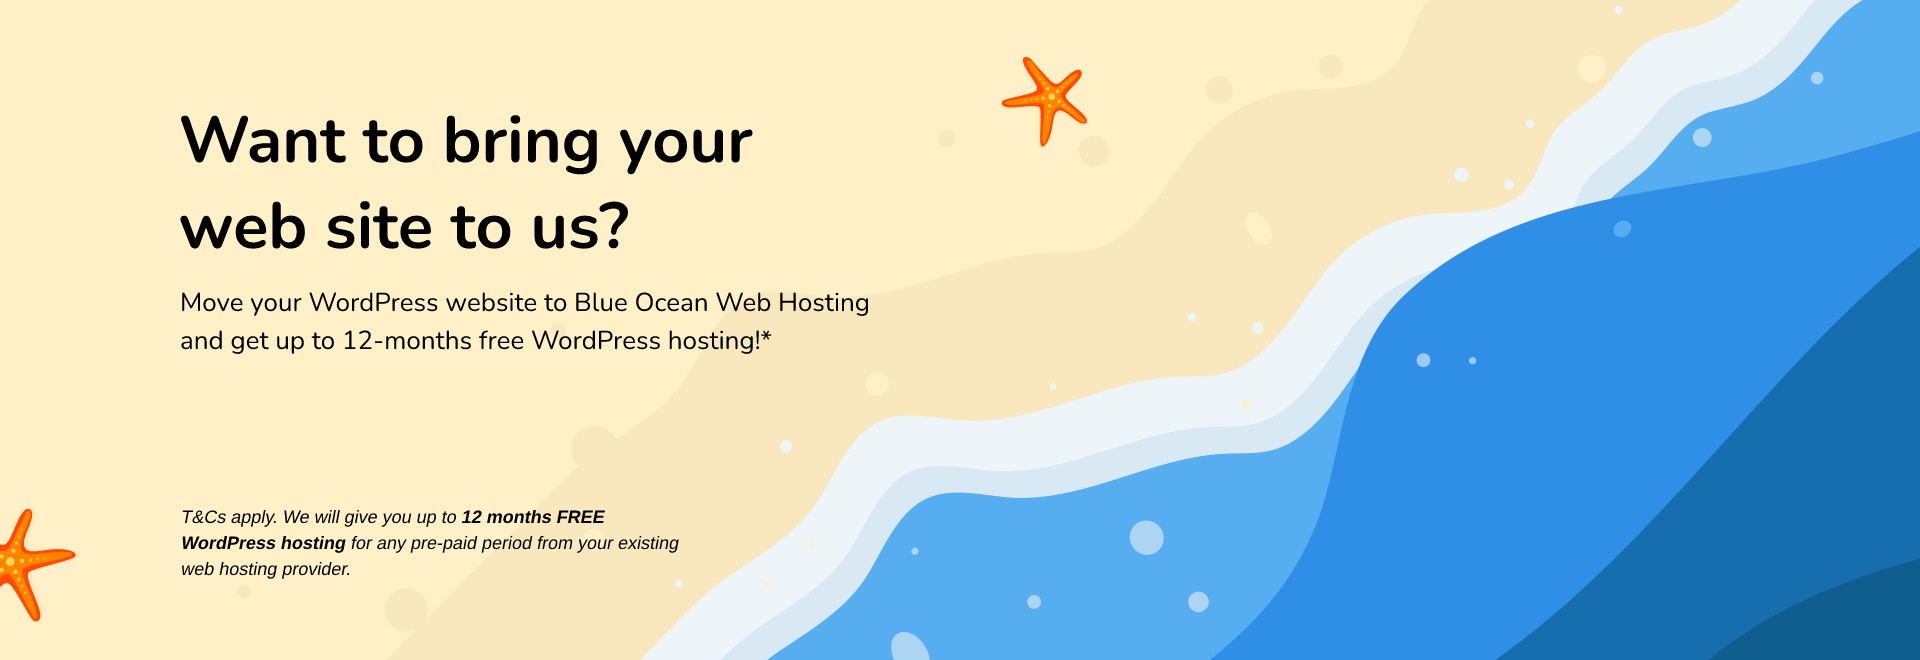 Image of waves on beach revealing text move your website to Blue Ocean Web Hosting